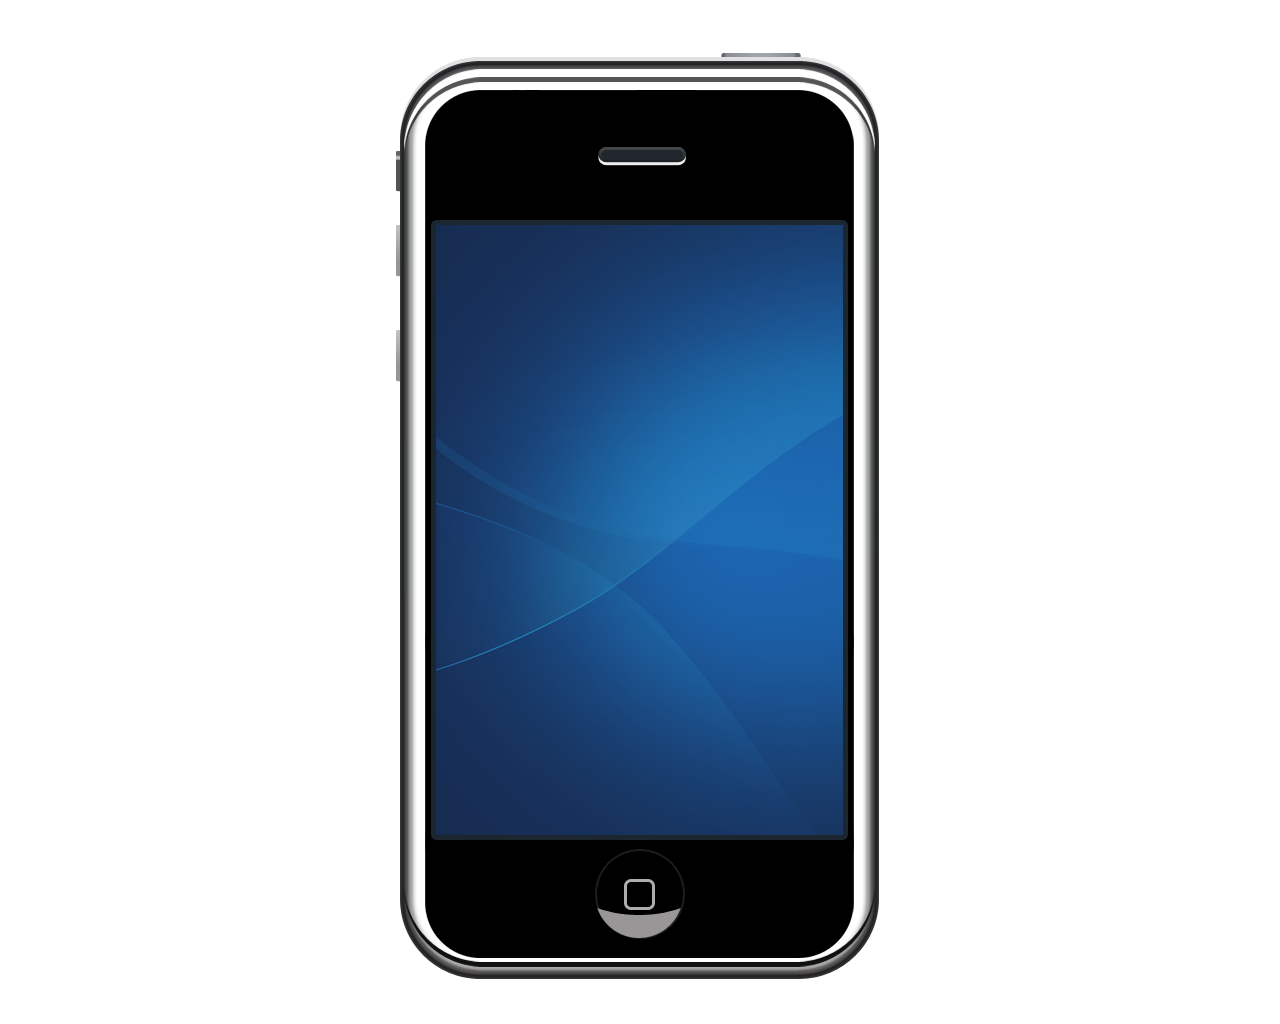 Iphone PNG Png Transparent Iphone Png.PNG Images. | PlusPNG